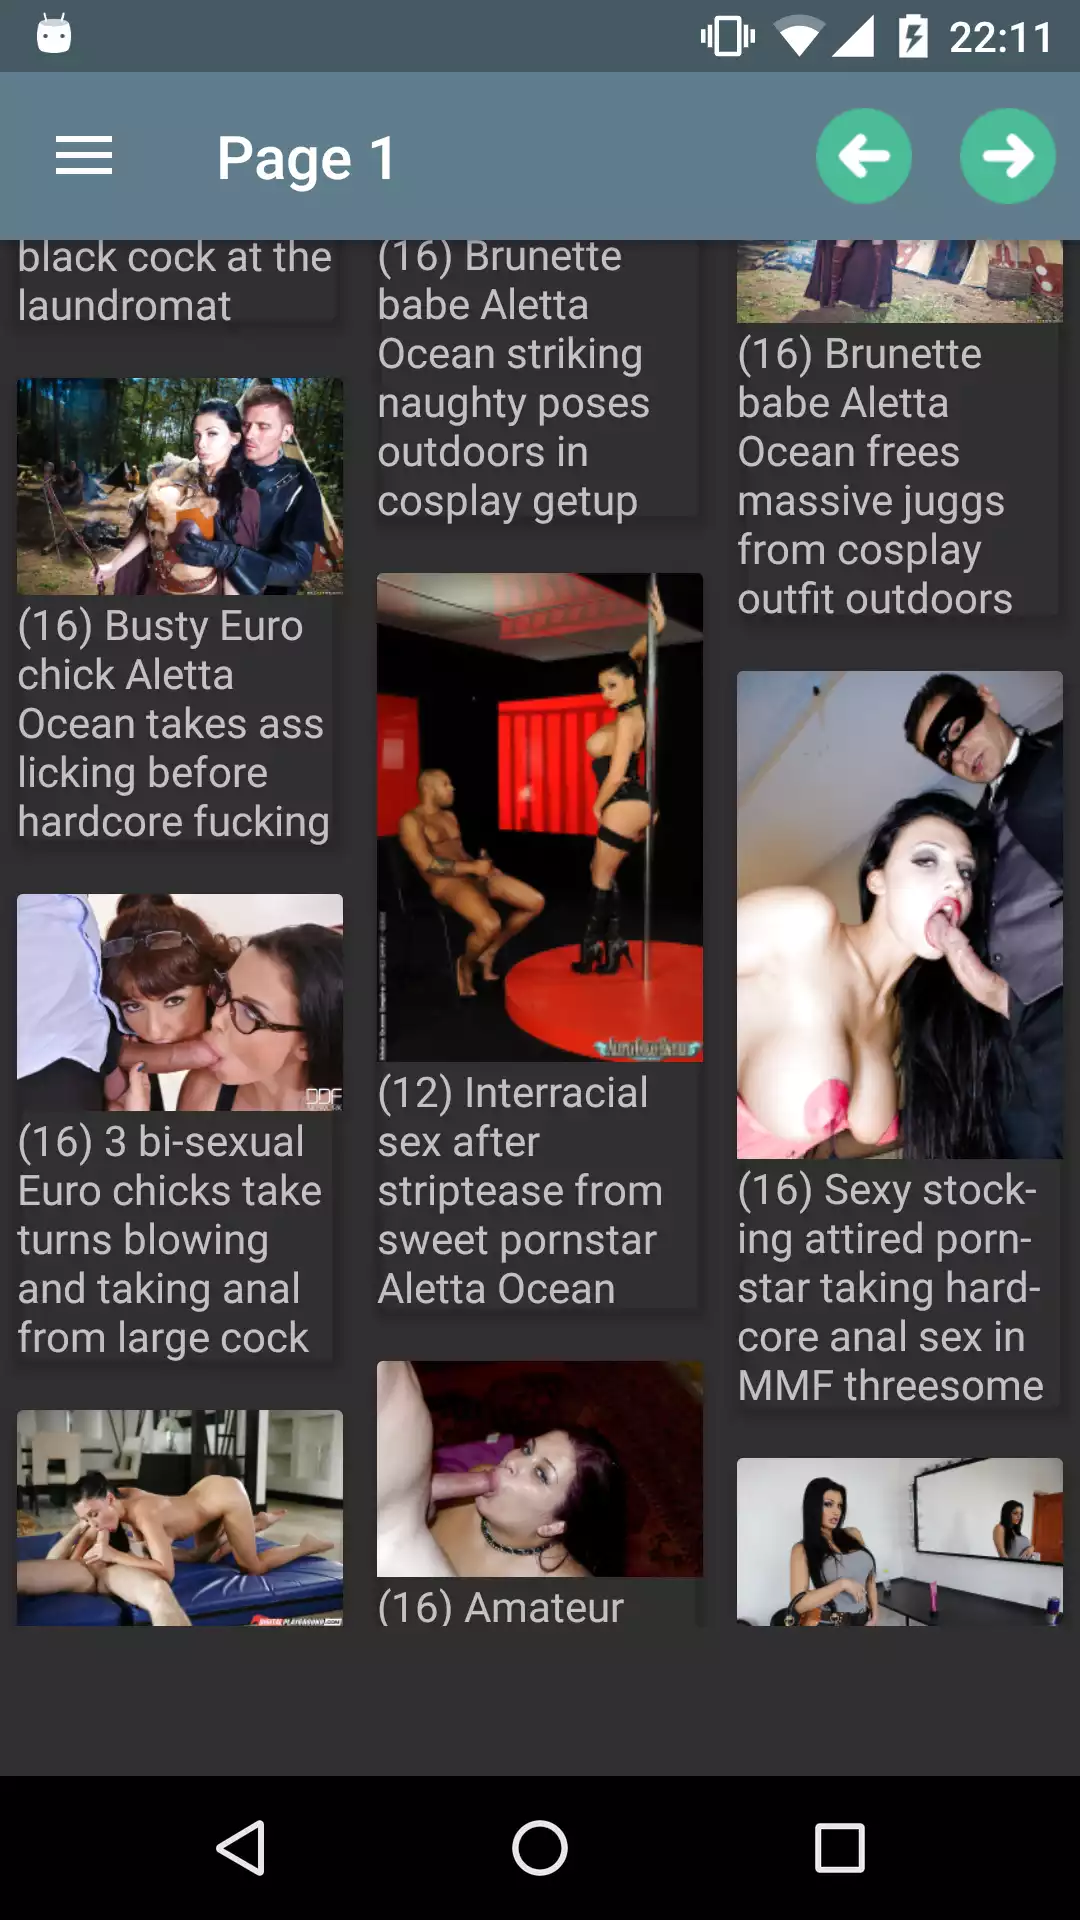 Aletta Ocean galleries best,with,tuesday,pornstar,hintai,titty,porn,aletta,hot,gallery,download,apk,hentai,picture,galleries,apps,images,free,dicks,photo,photos,chicks,collection,girl,phone,ocean,comics,sexy